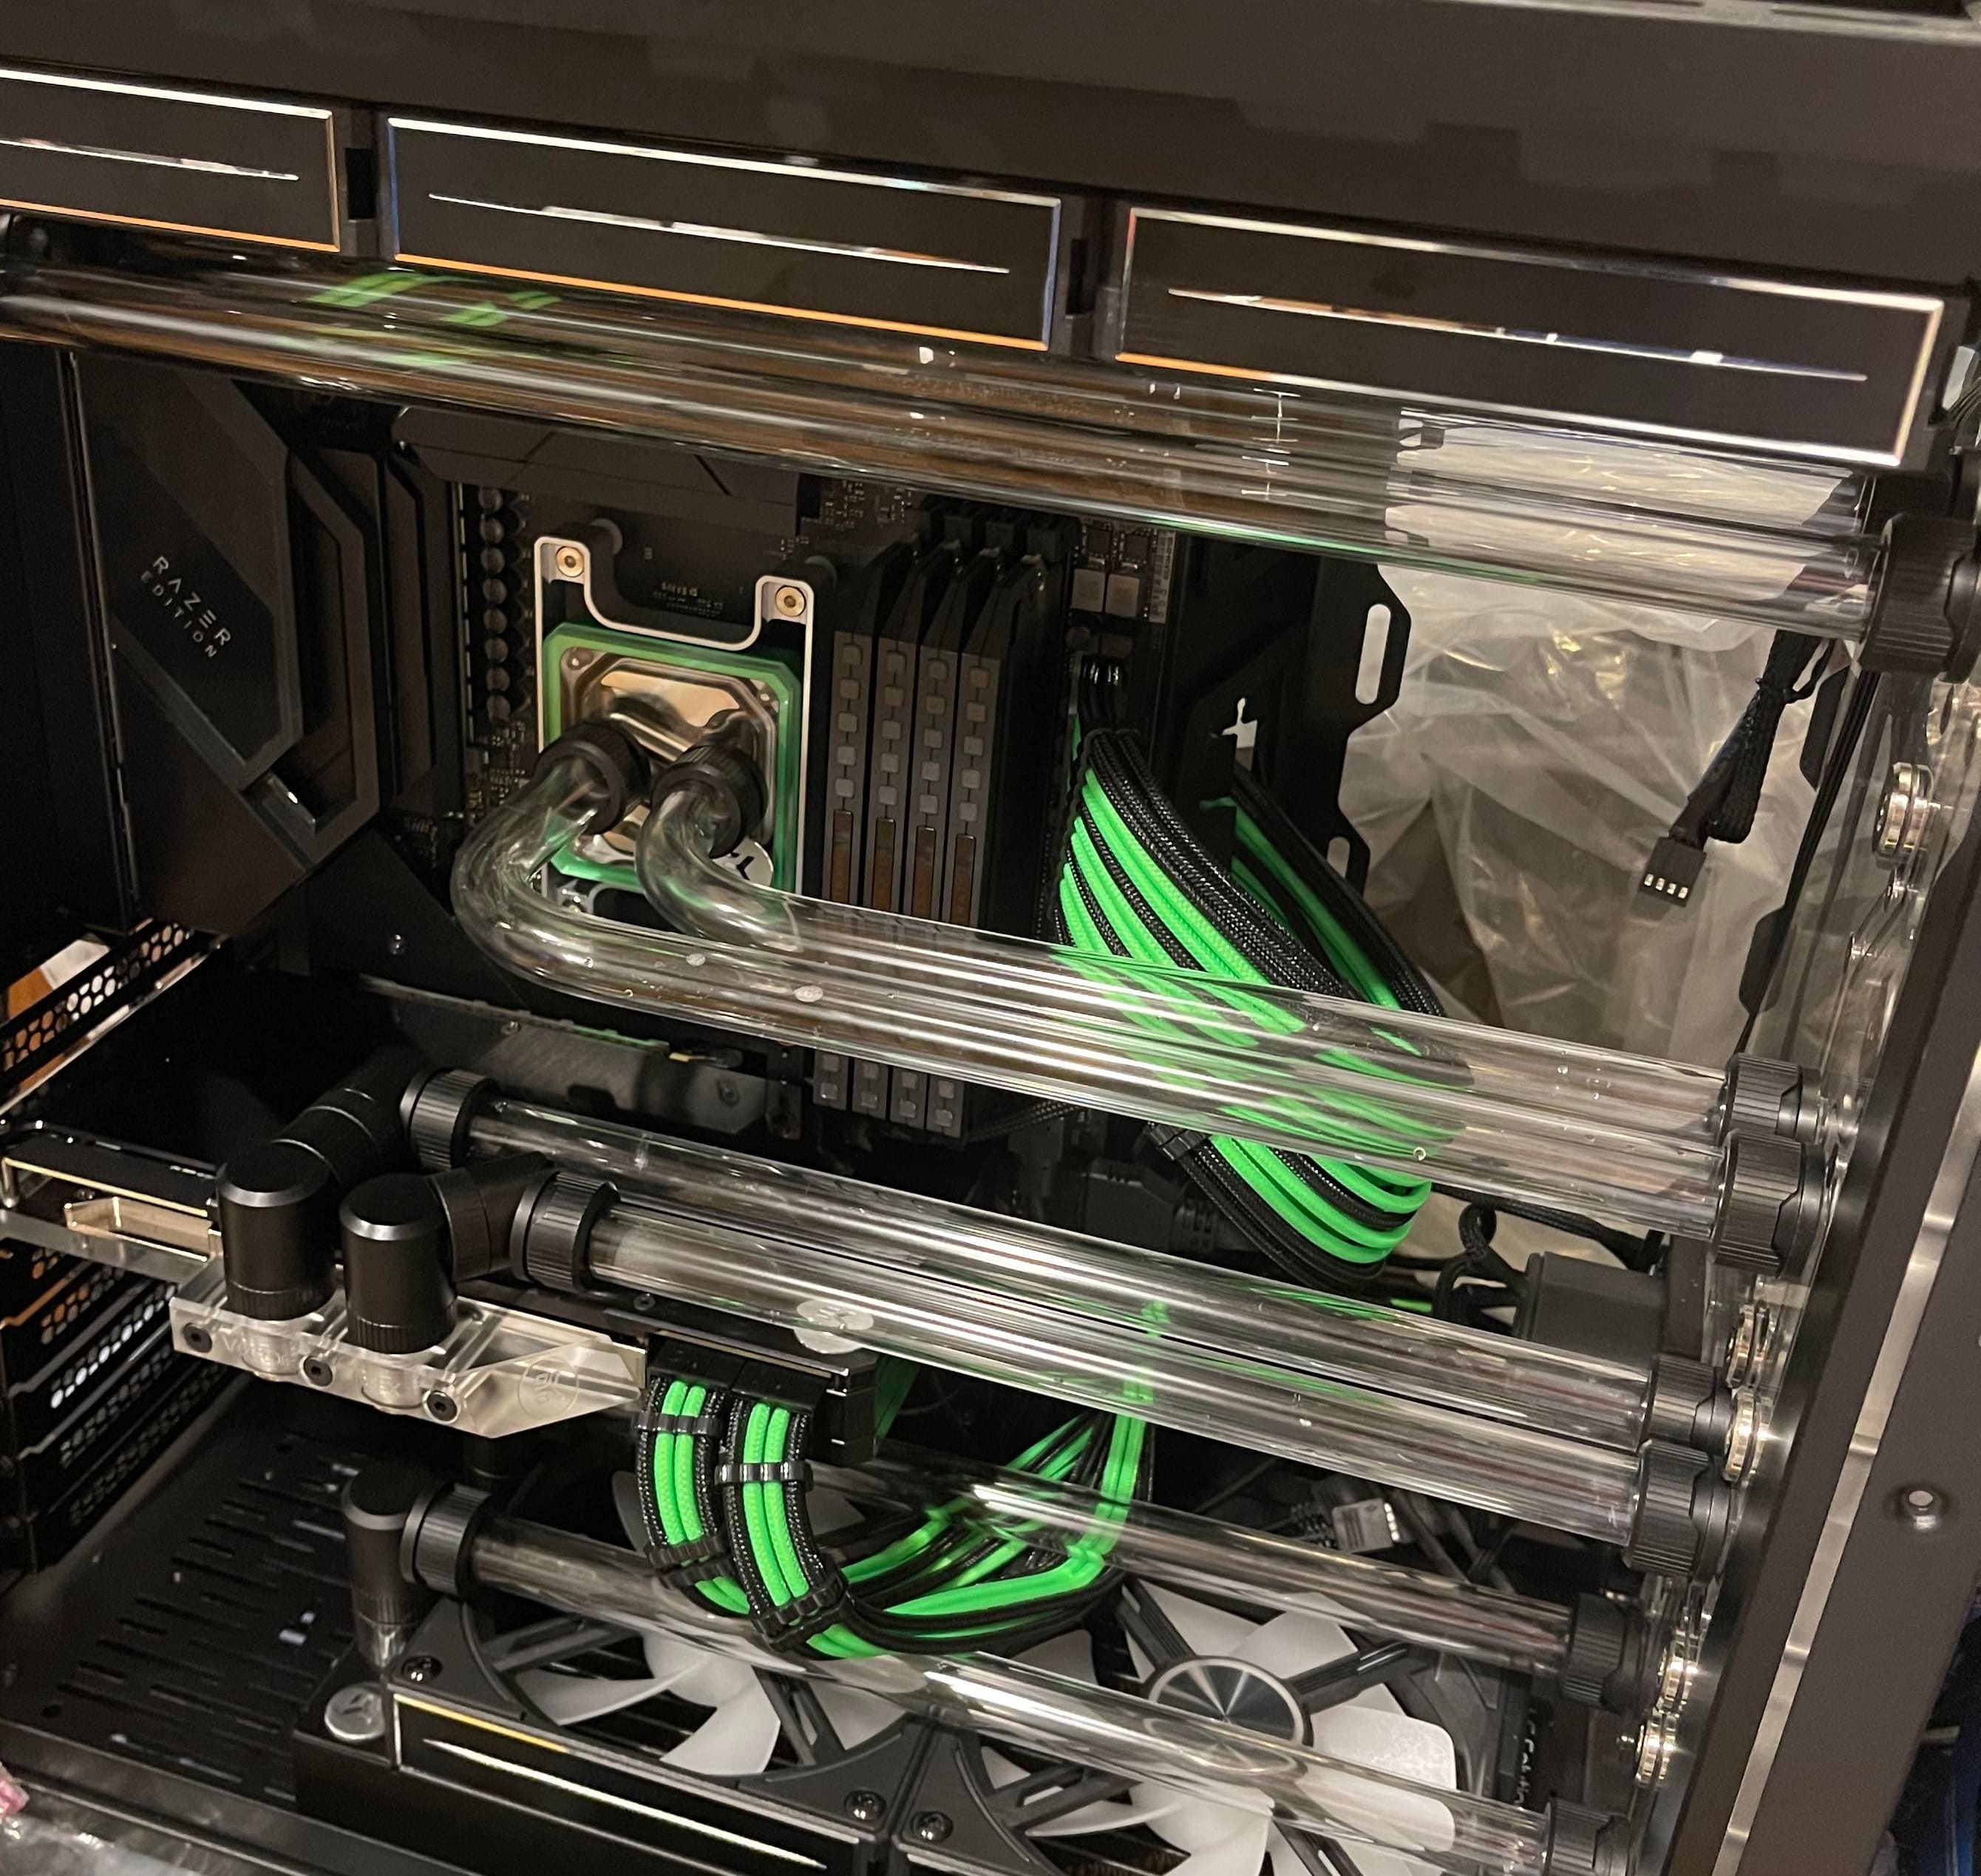 A custom PC water cooling loop awaiting its coolant